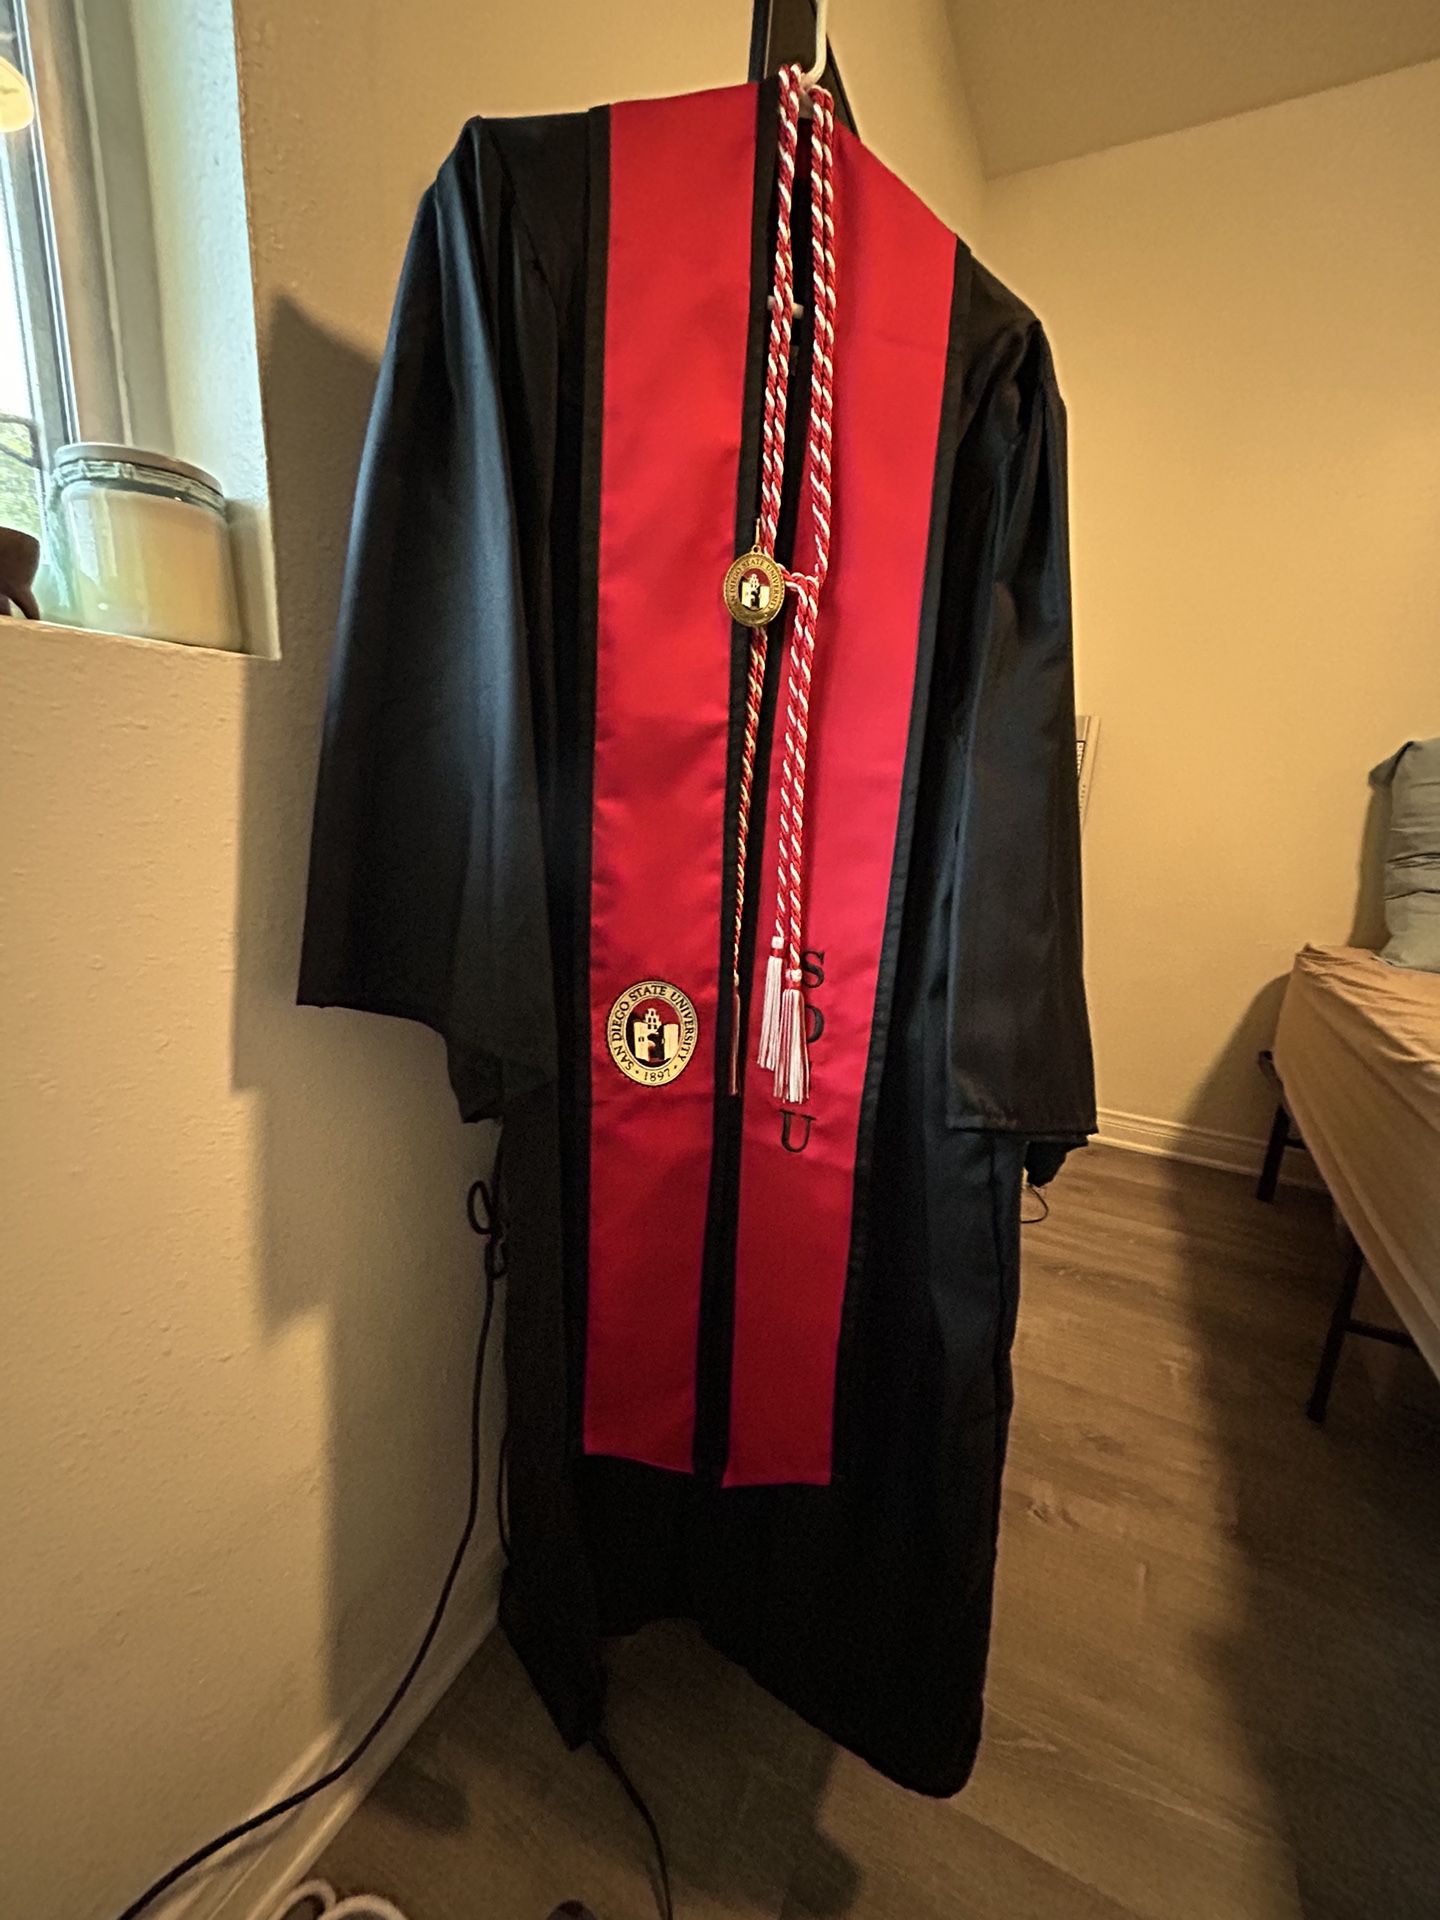 SDSU CAP AND GOWN 